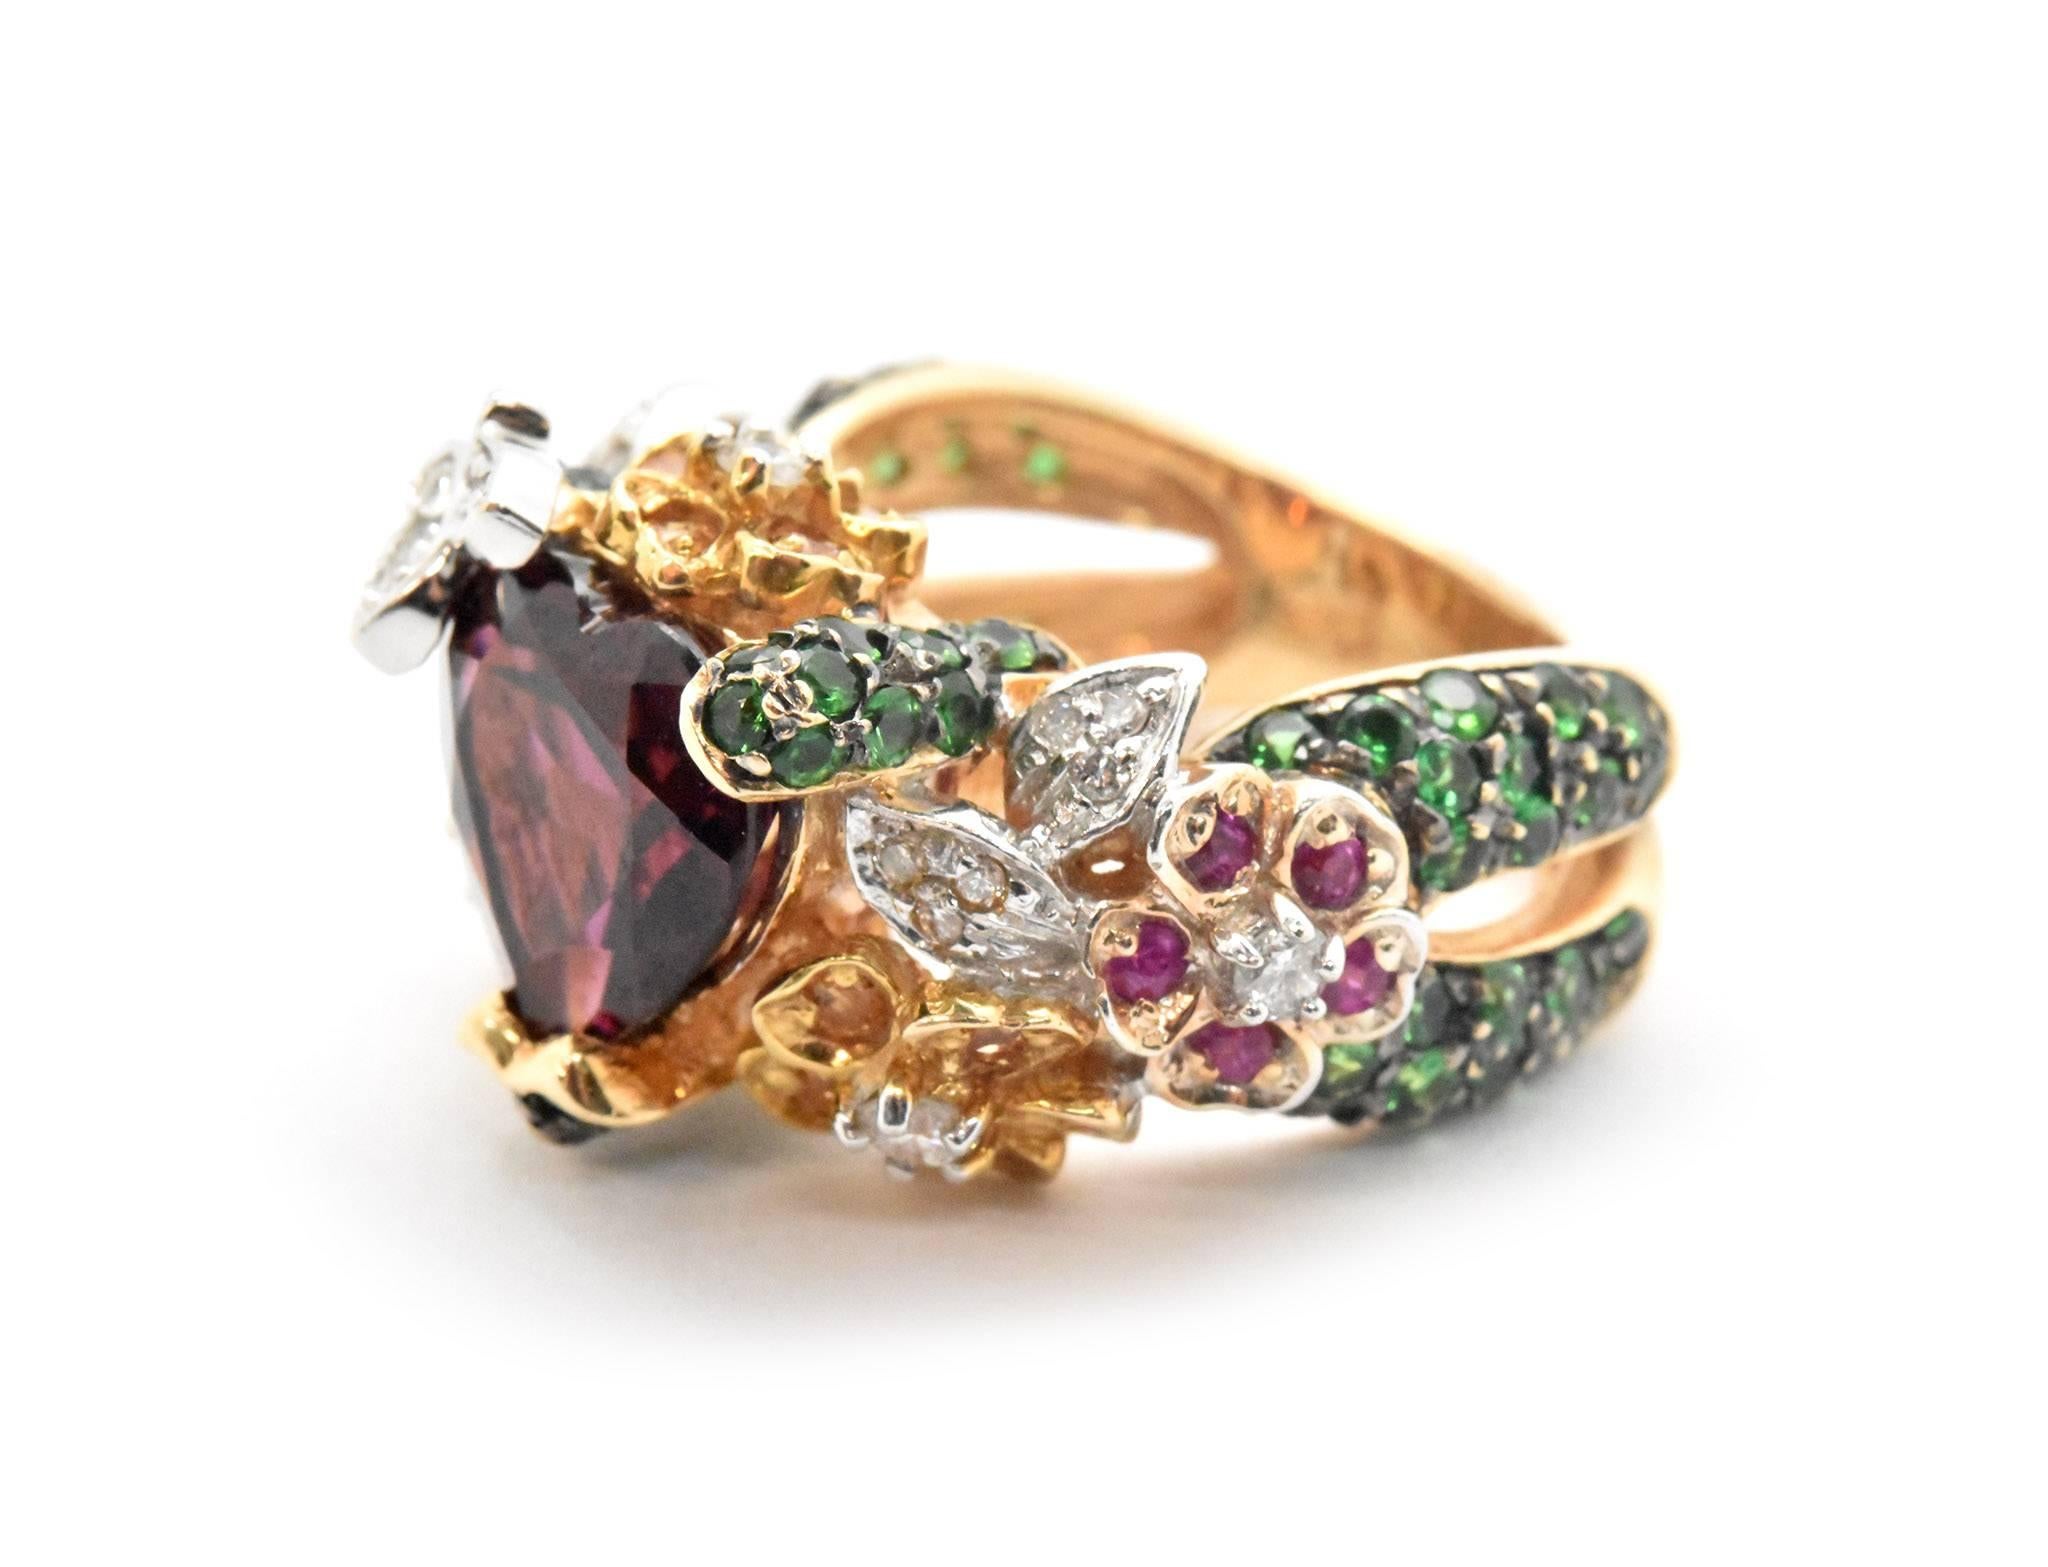 Modern Red Garnet Two-Tone Cocktail Ring with Diamonds, Tsavorites and Sapphires